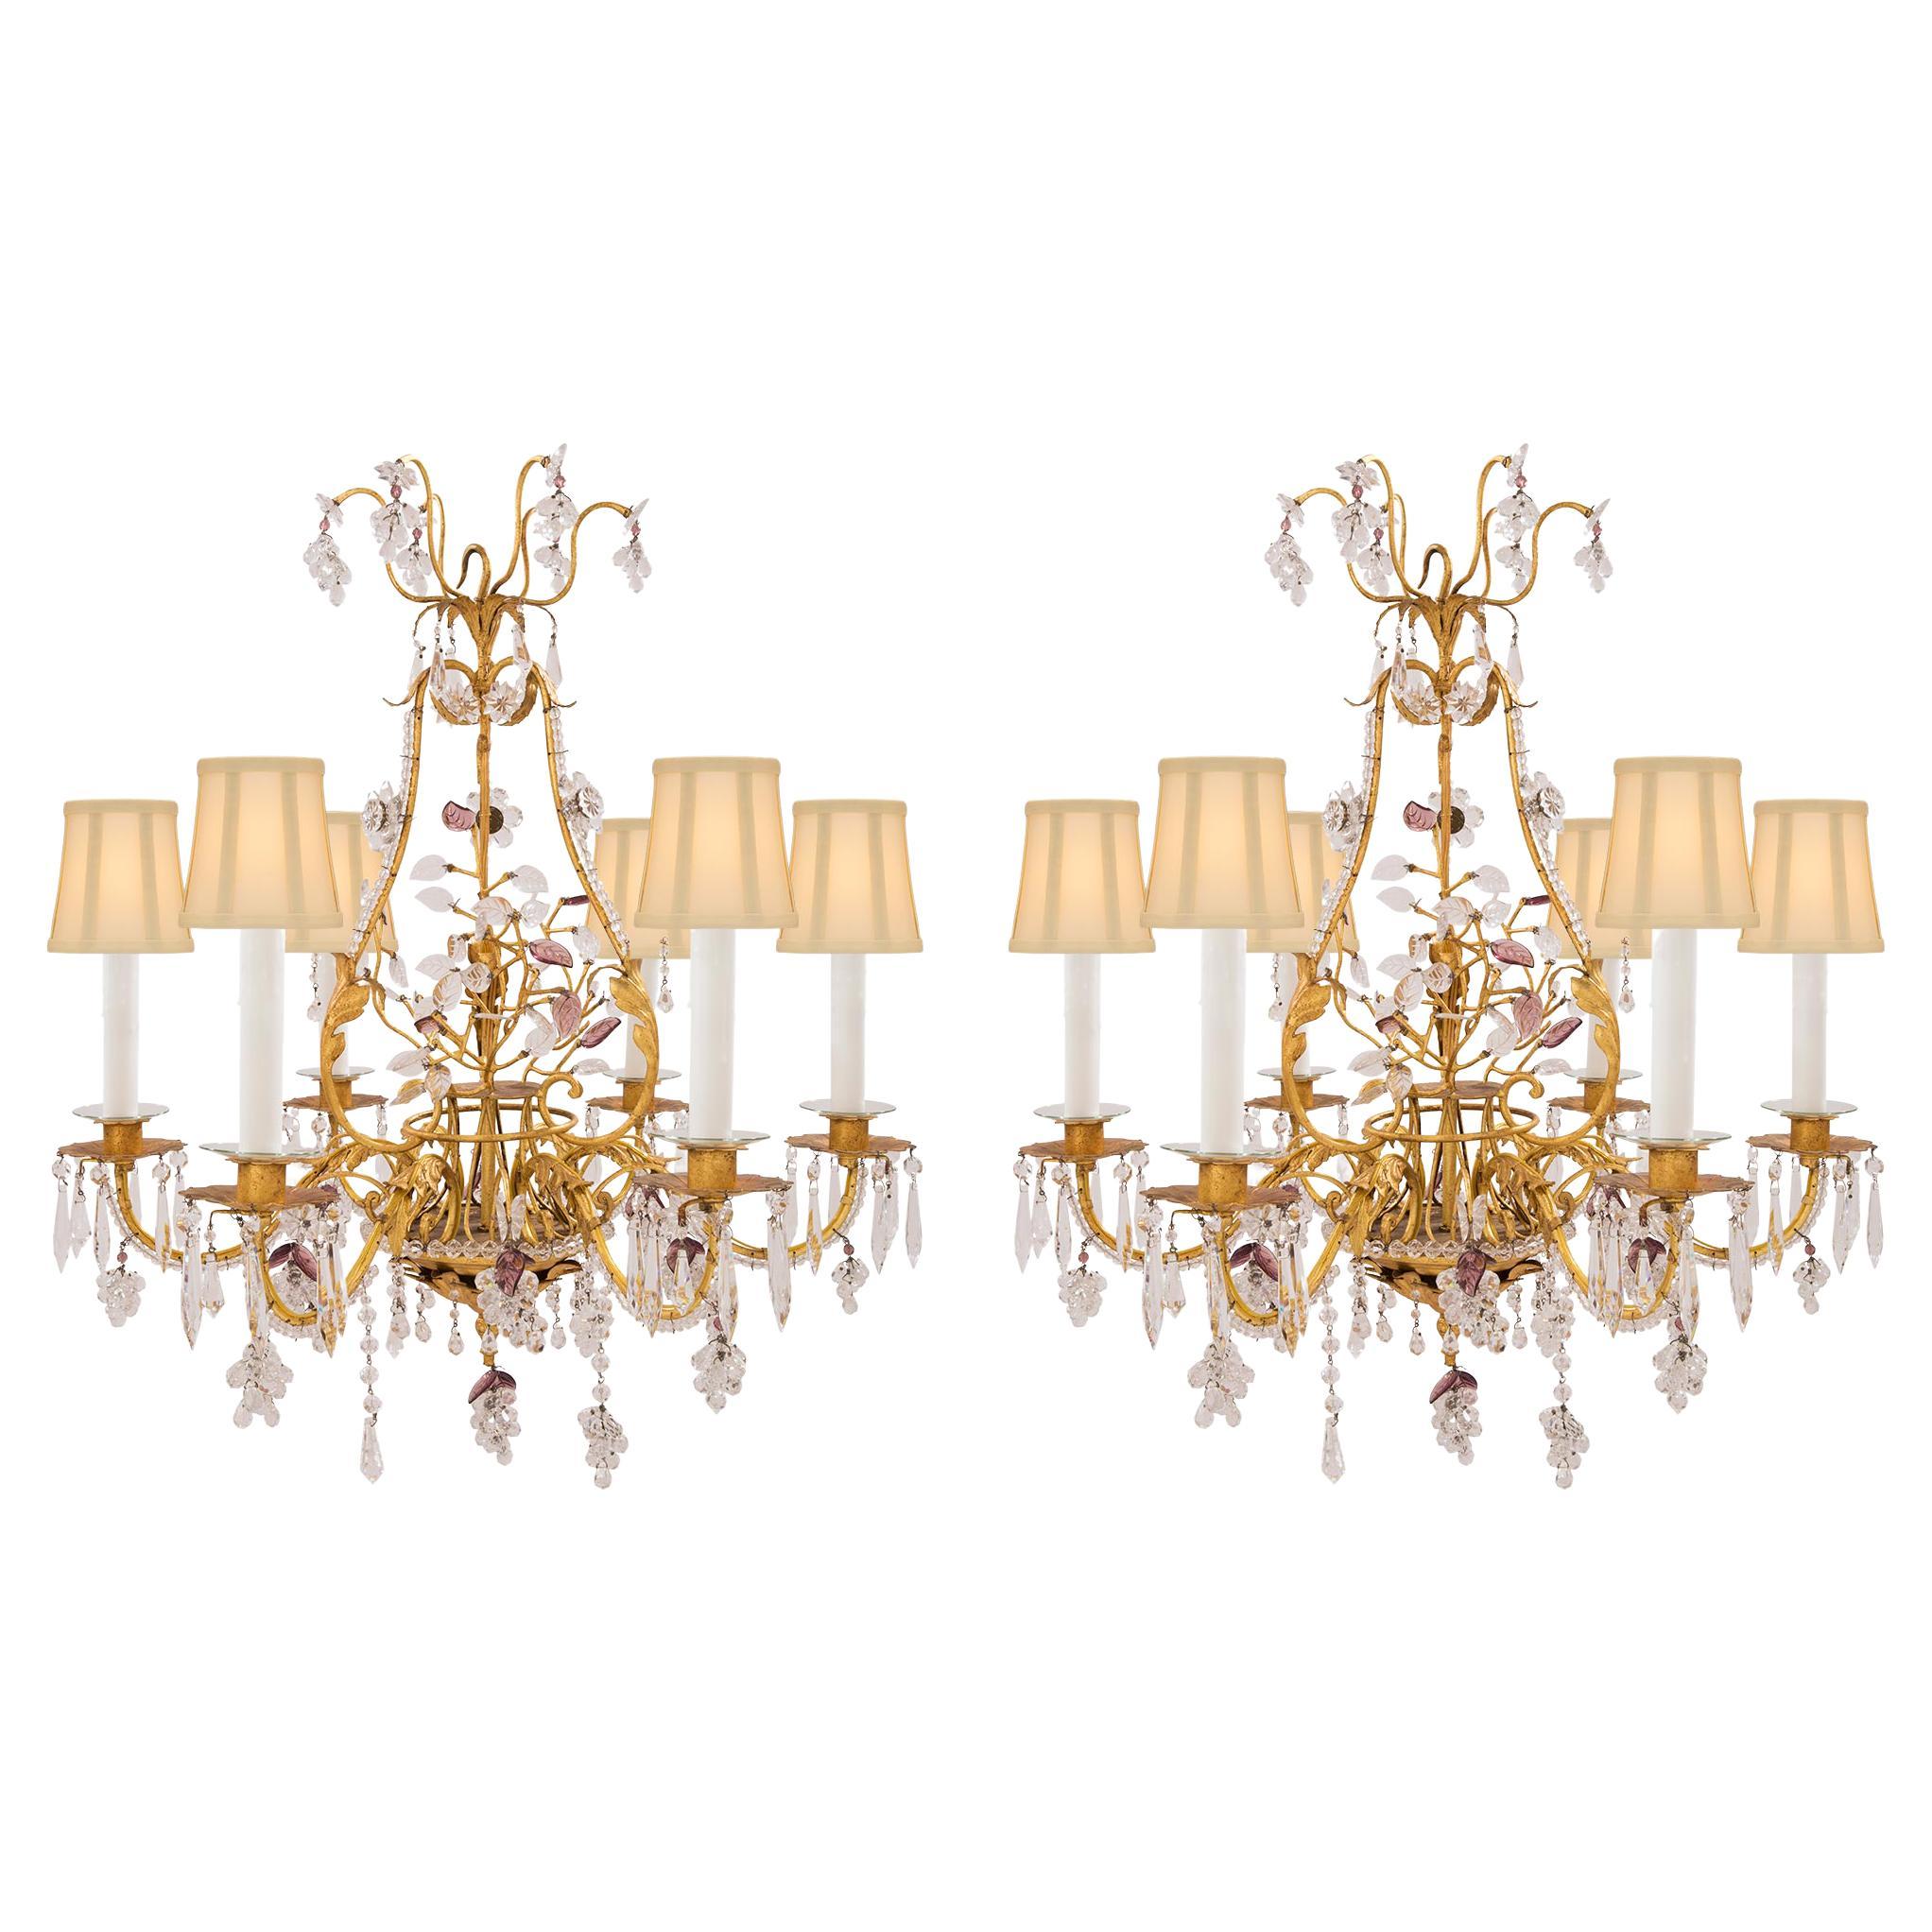 Pair of French 19th Century Louis XV St. Chandeliers Attributed to Maison Baguès